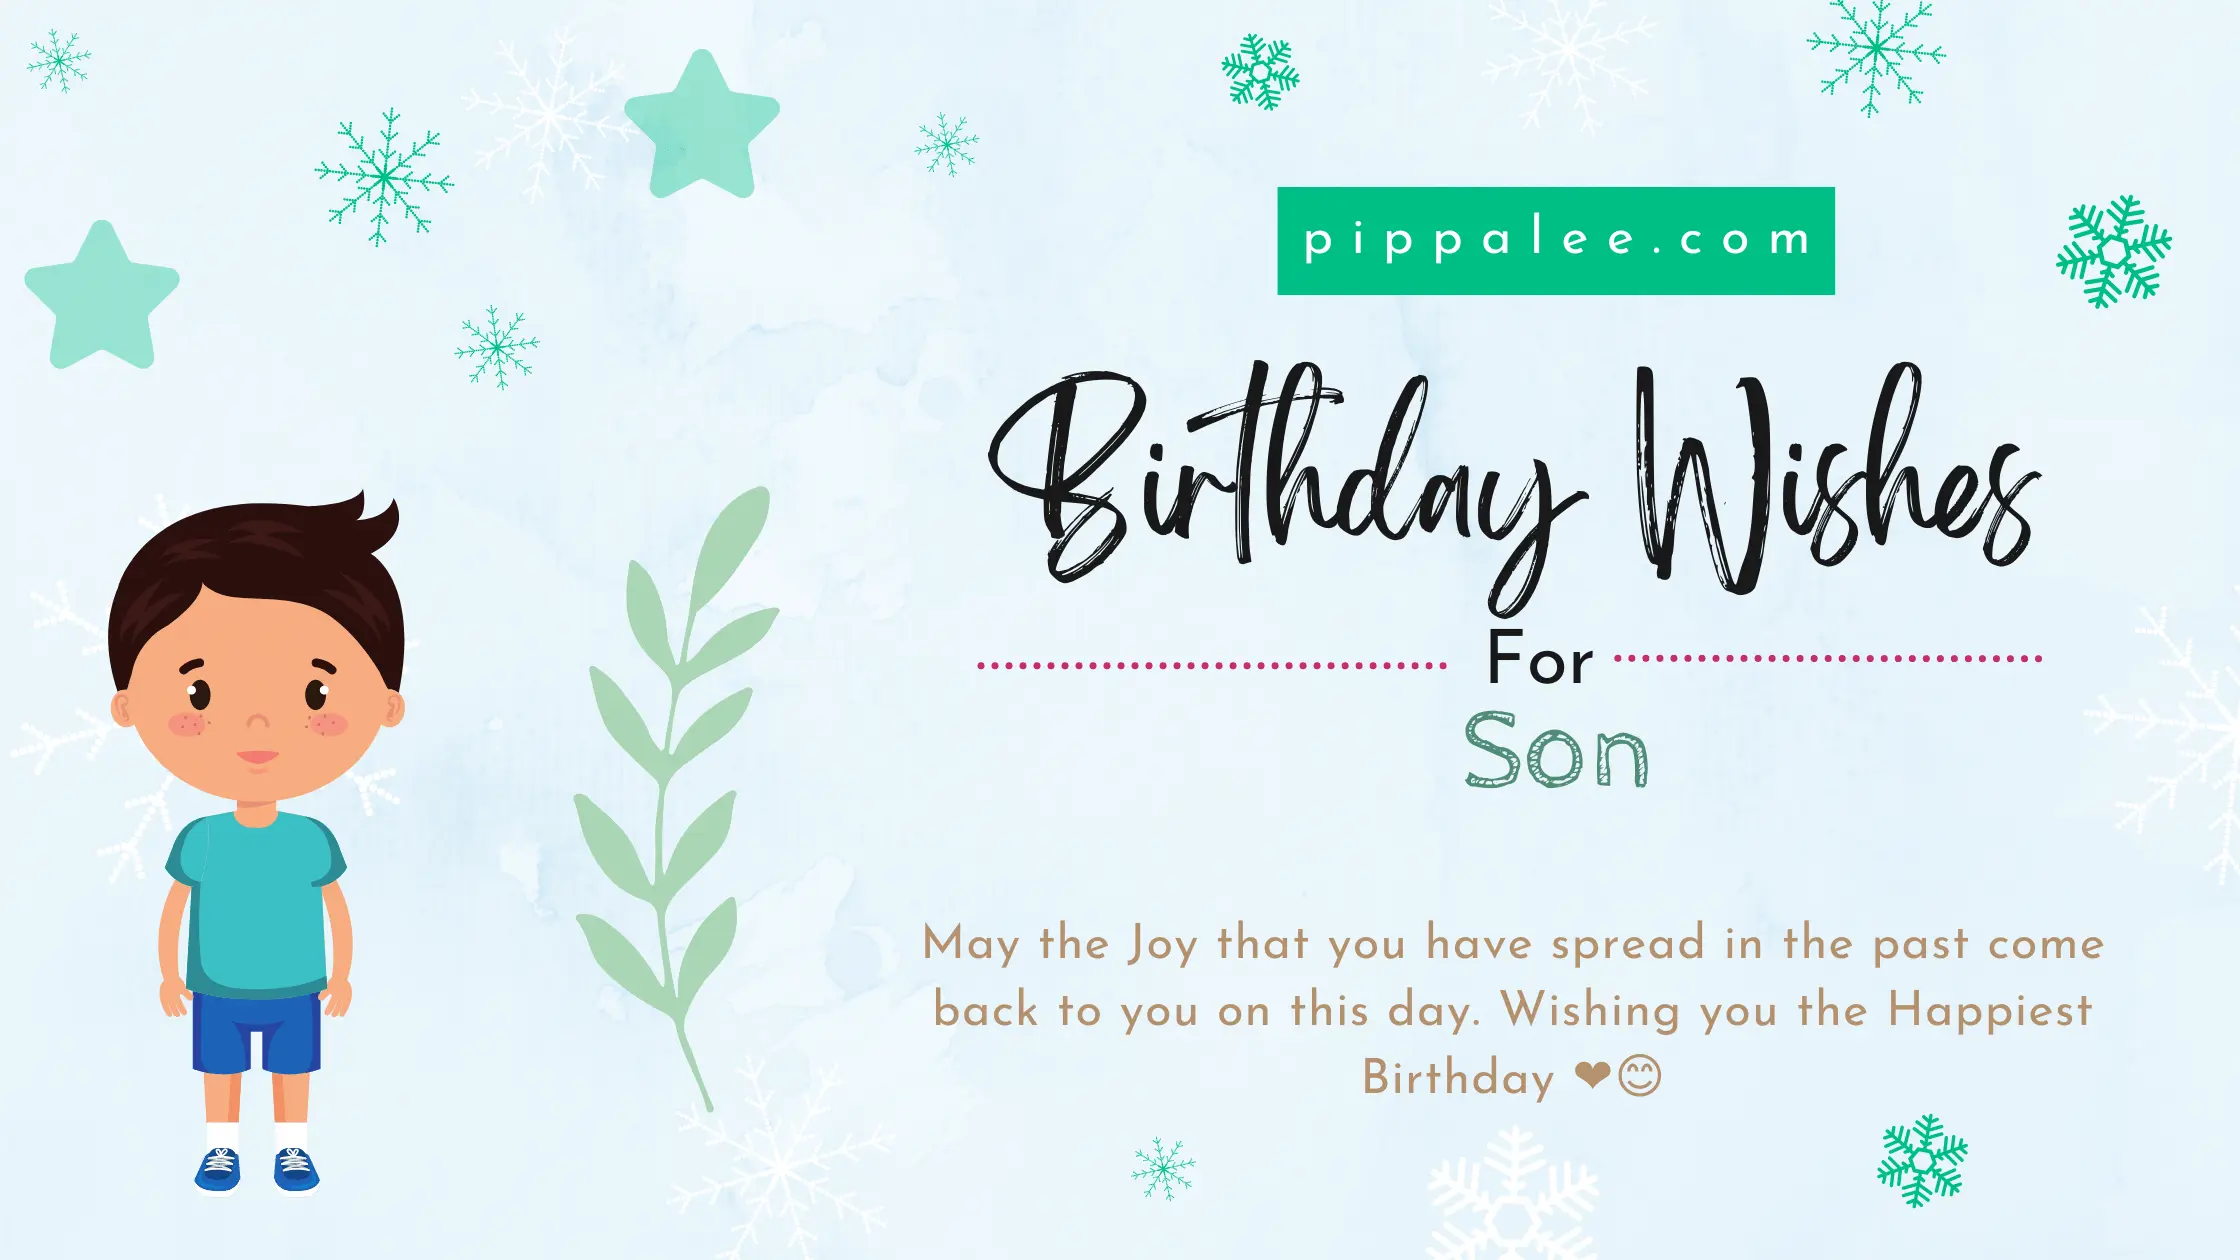 Birthday Wishes For Son - Warm Wishes